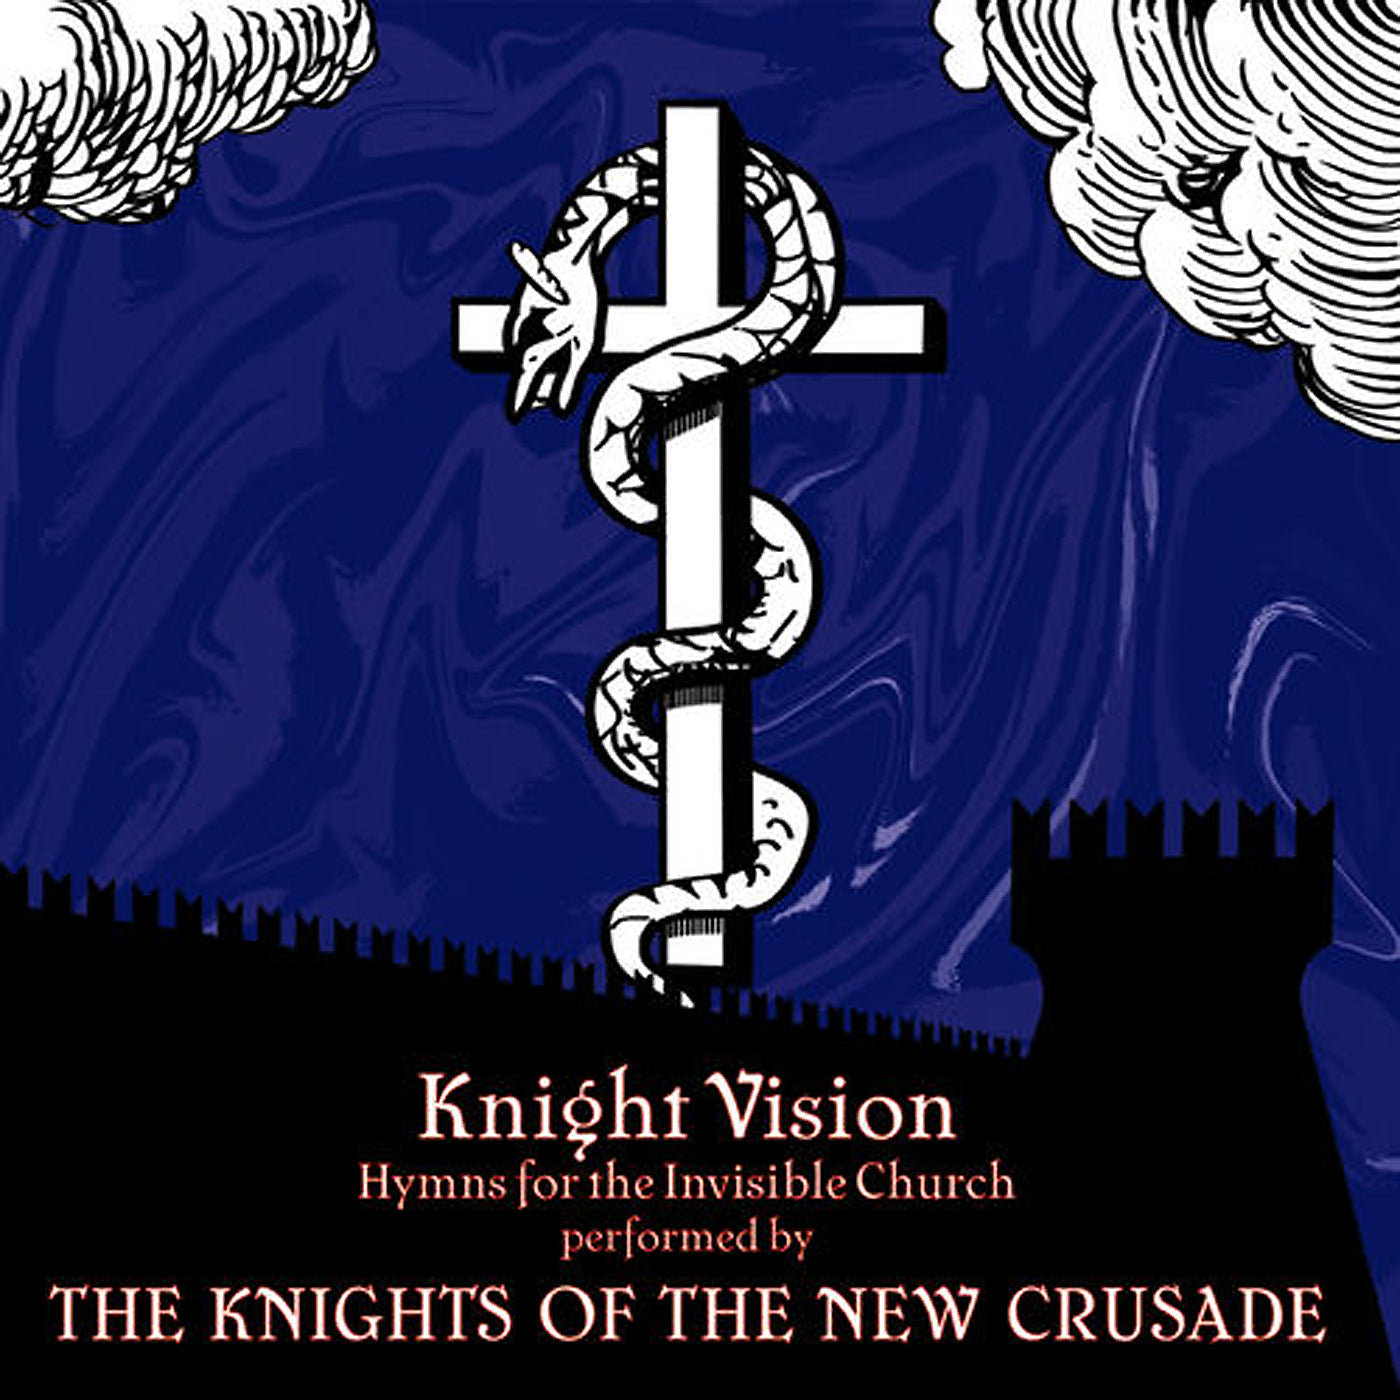 v420 - Knights Of The New Crusade - "Knight Vision -- Hymns For The Invisible Church"